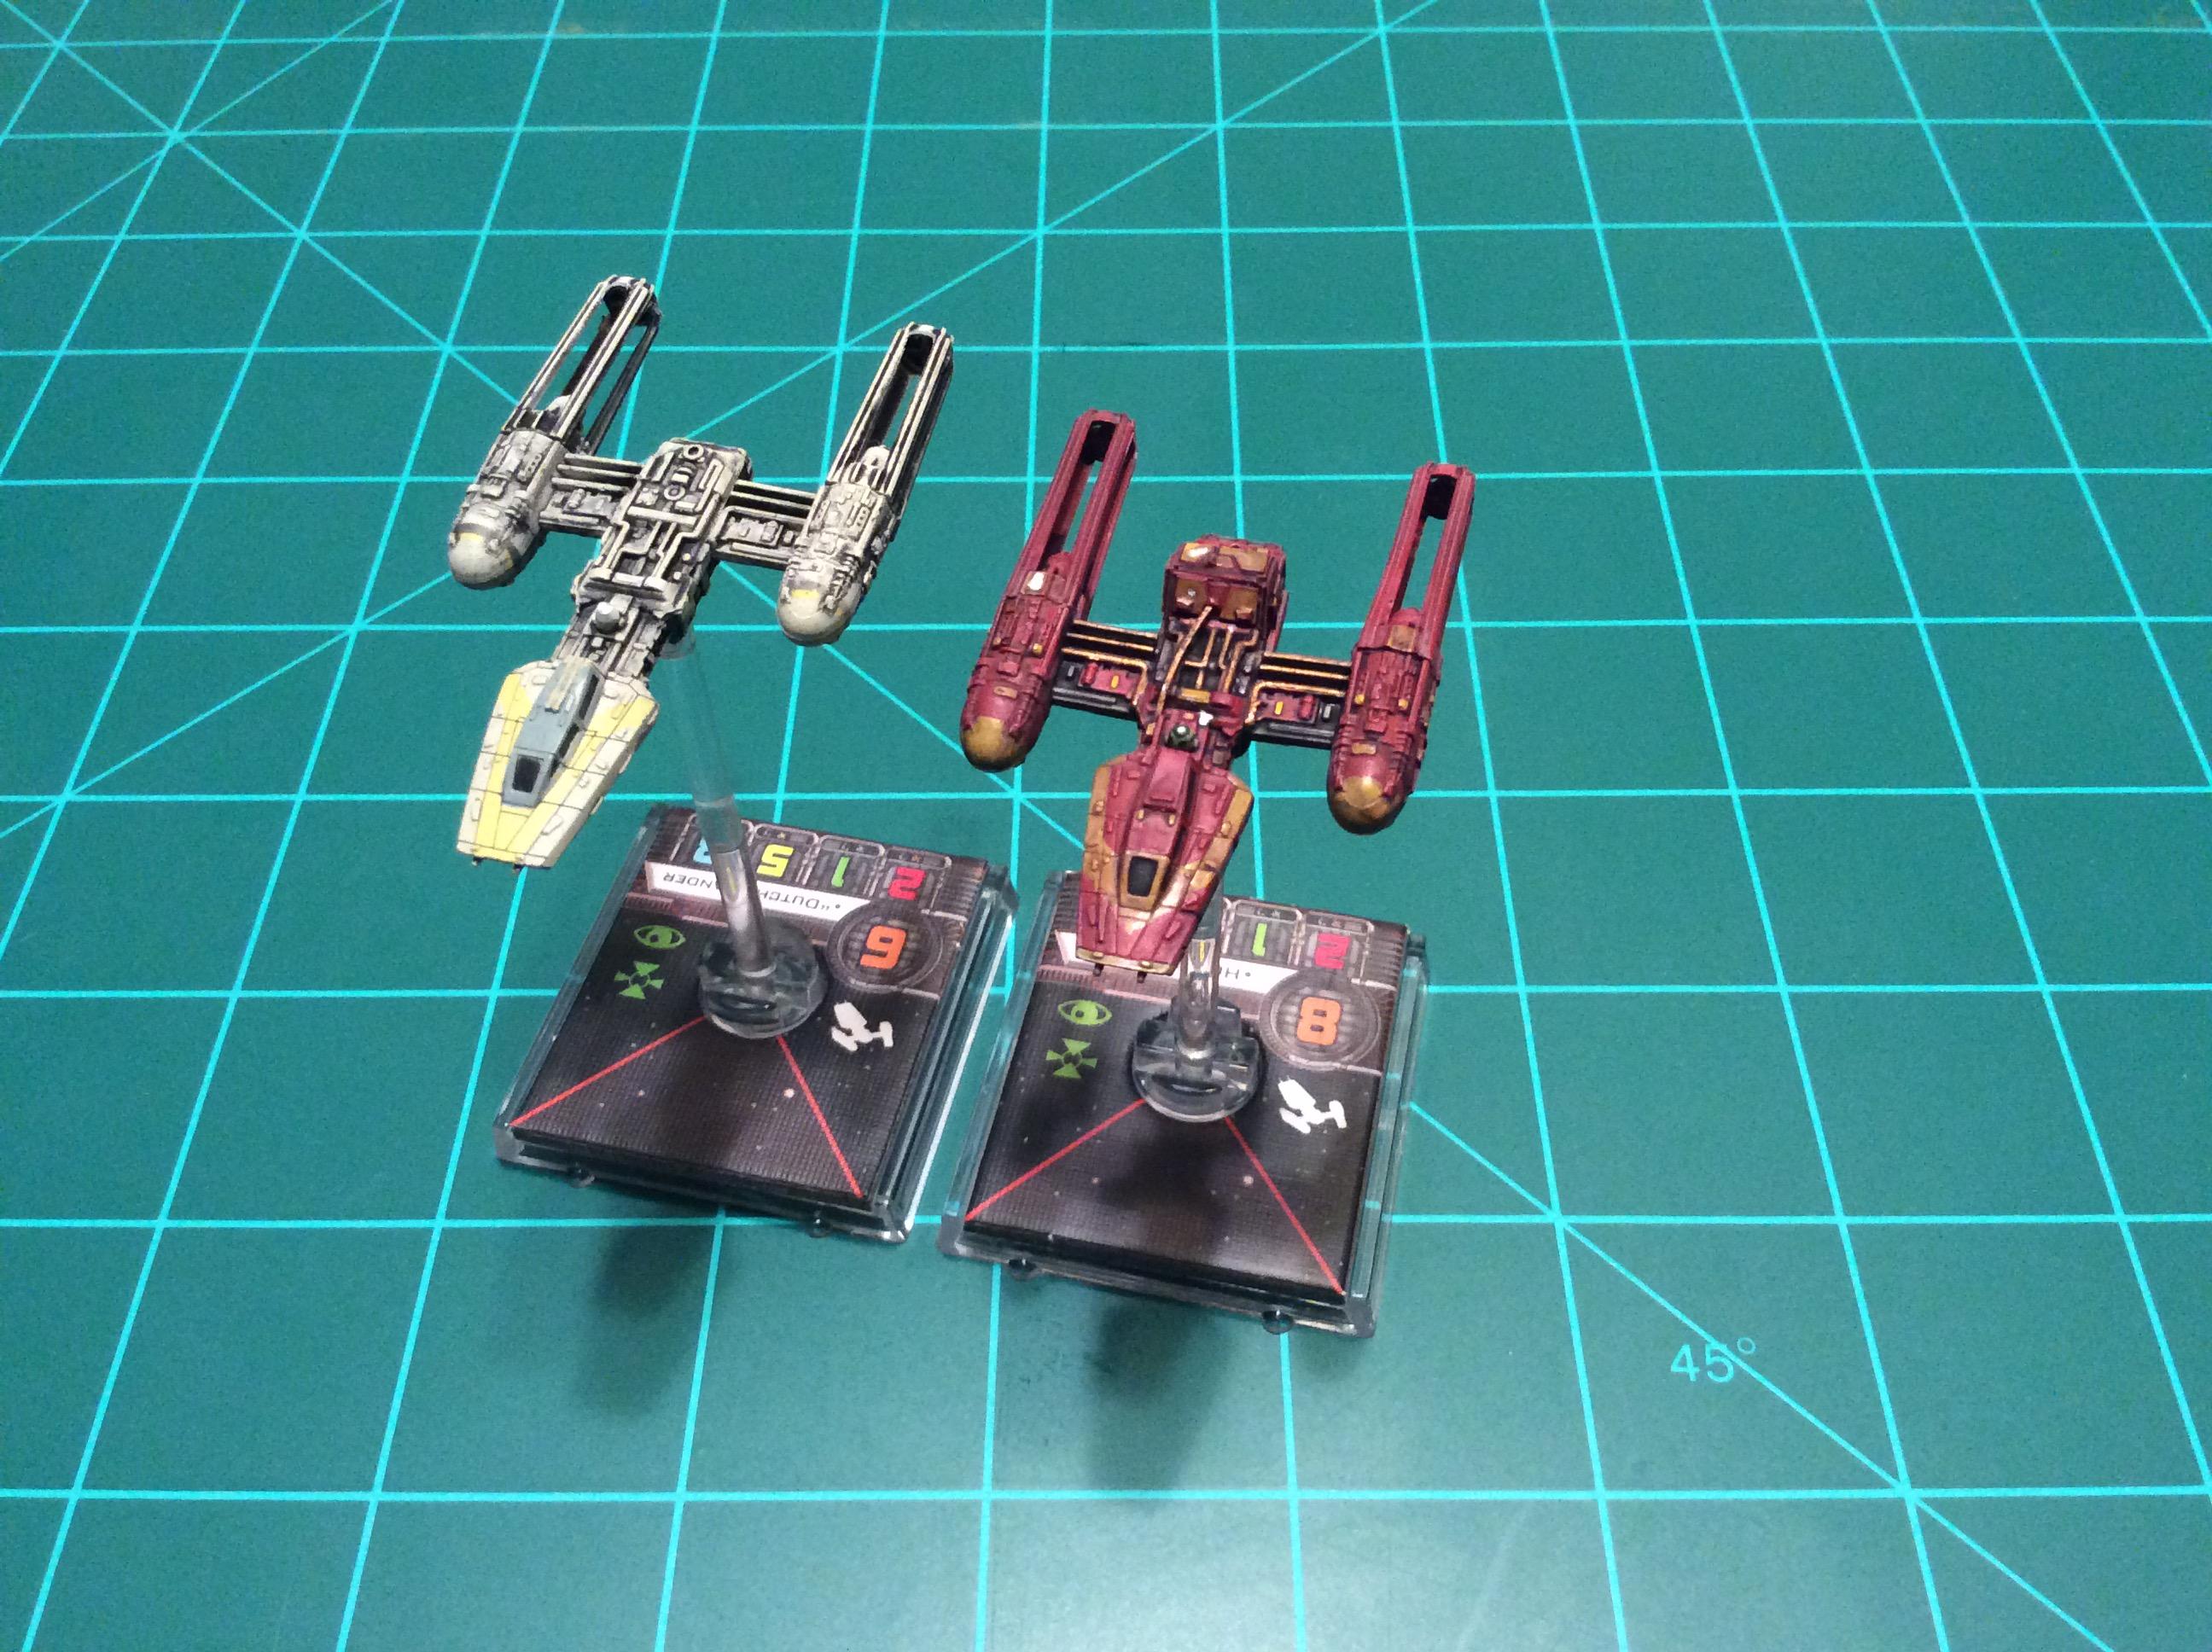 1/270 Scale, Star Wars, X-wing Miniatures Game, Y-wing